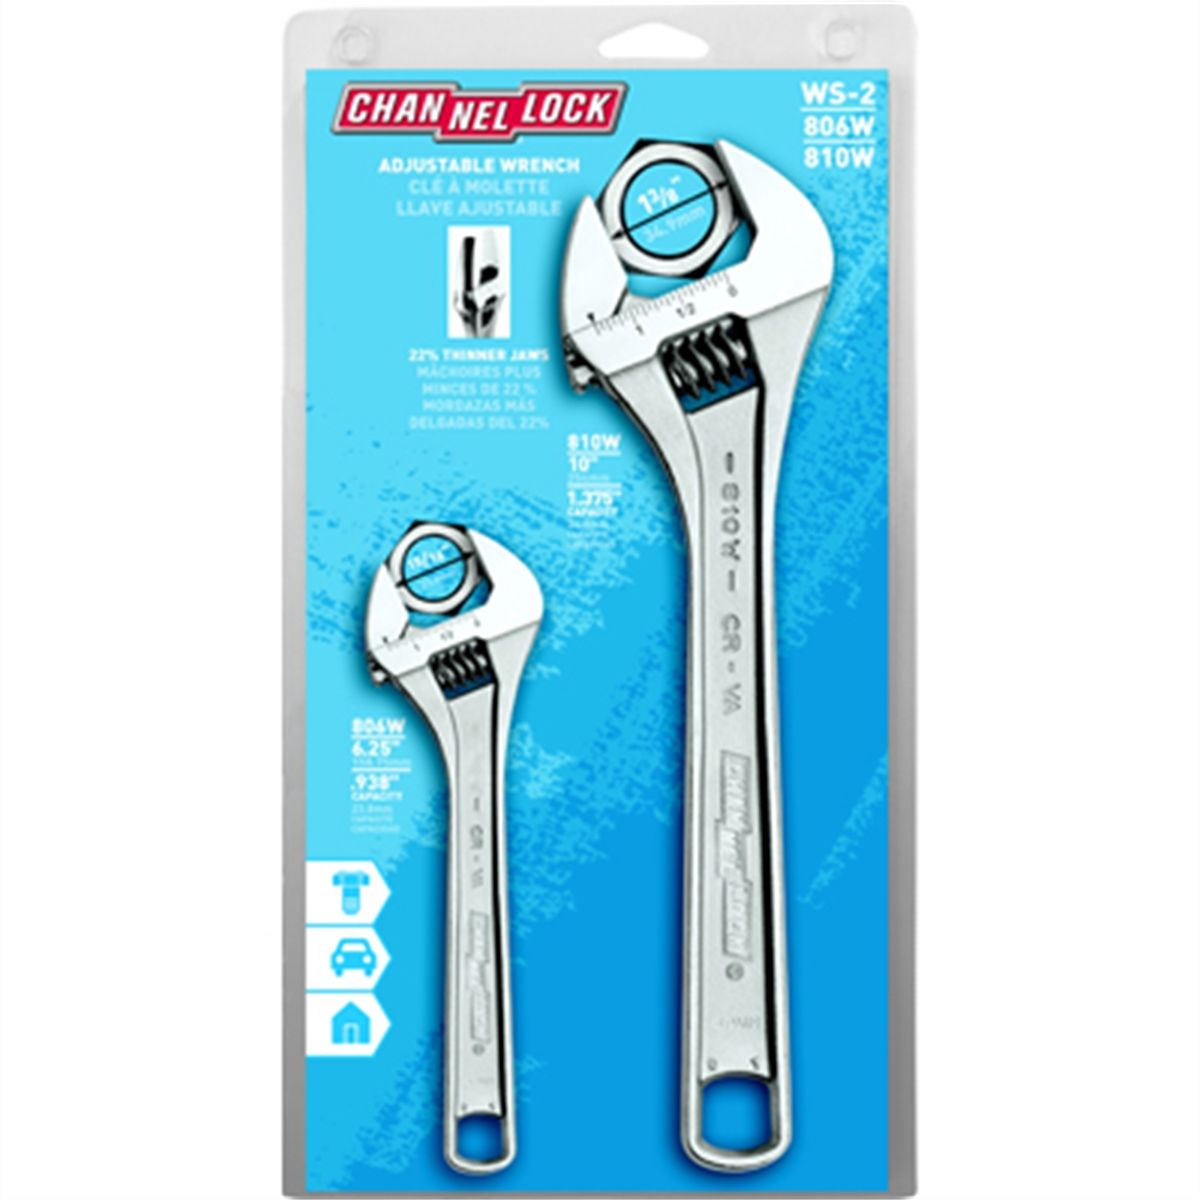 2 PIECE ADJUSTABLE WRENCH (6IN & 10IN)